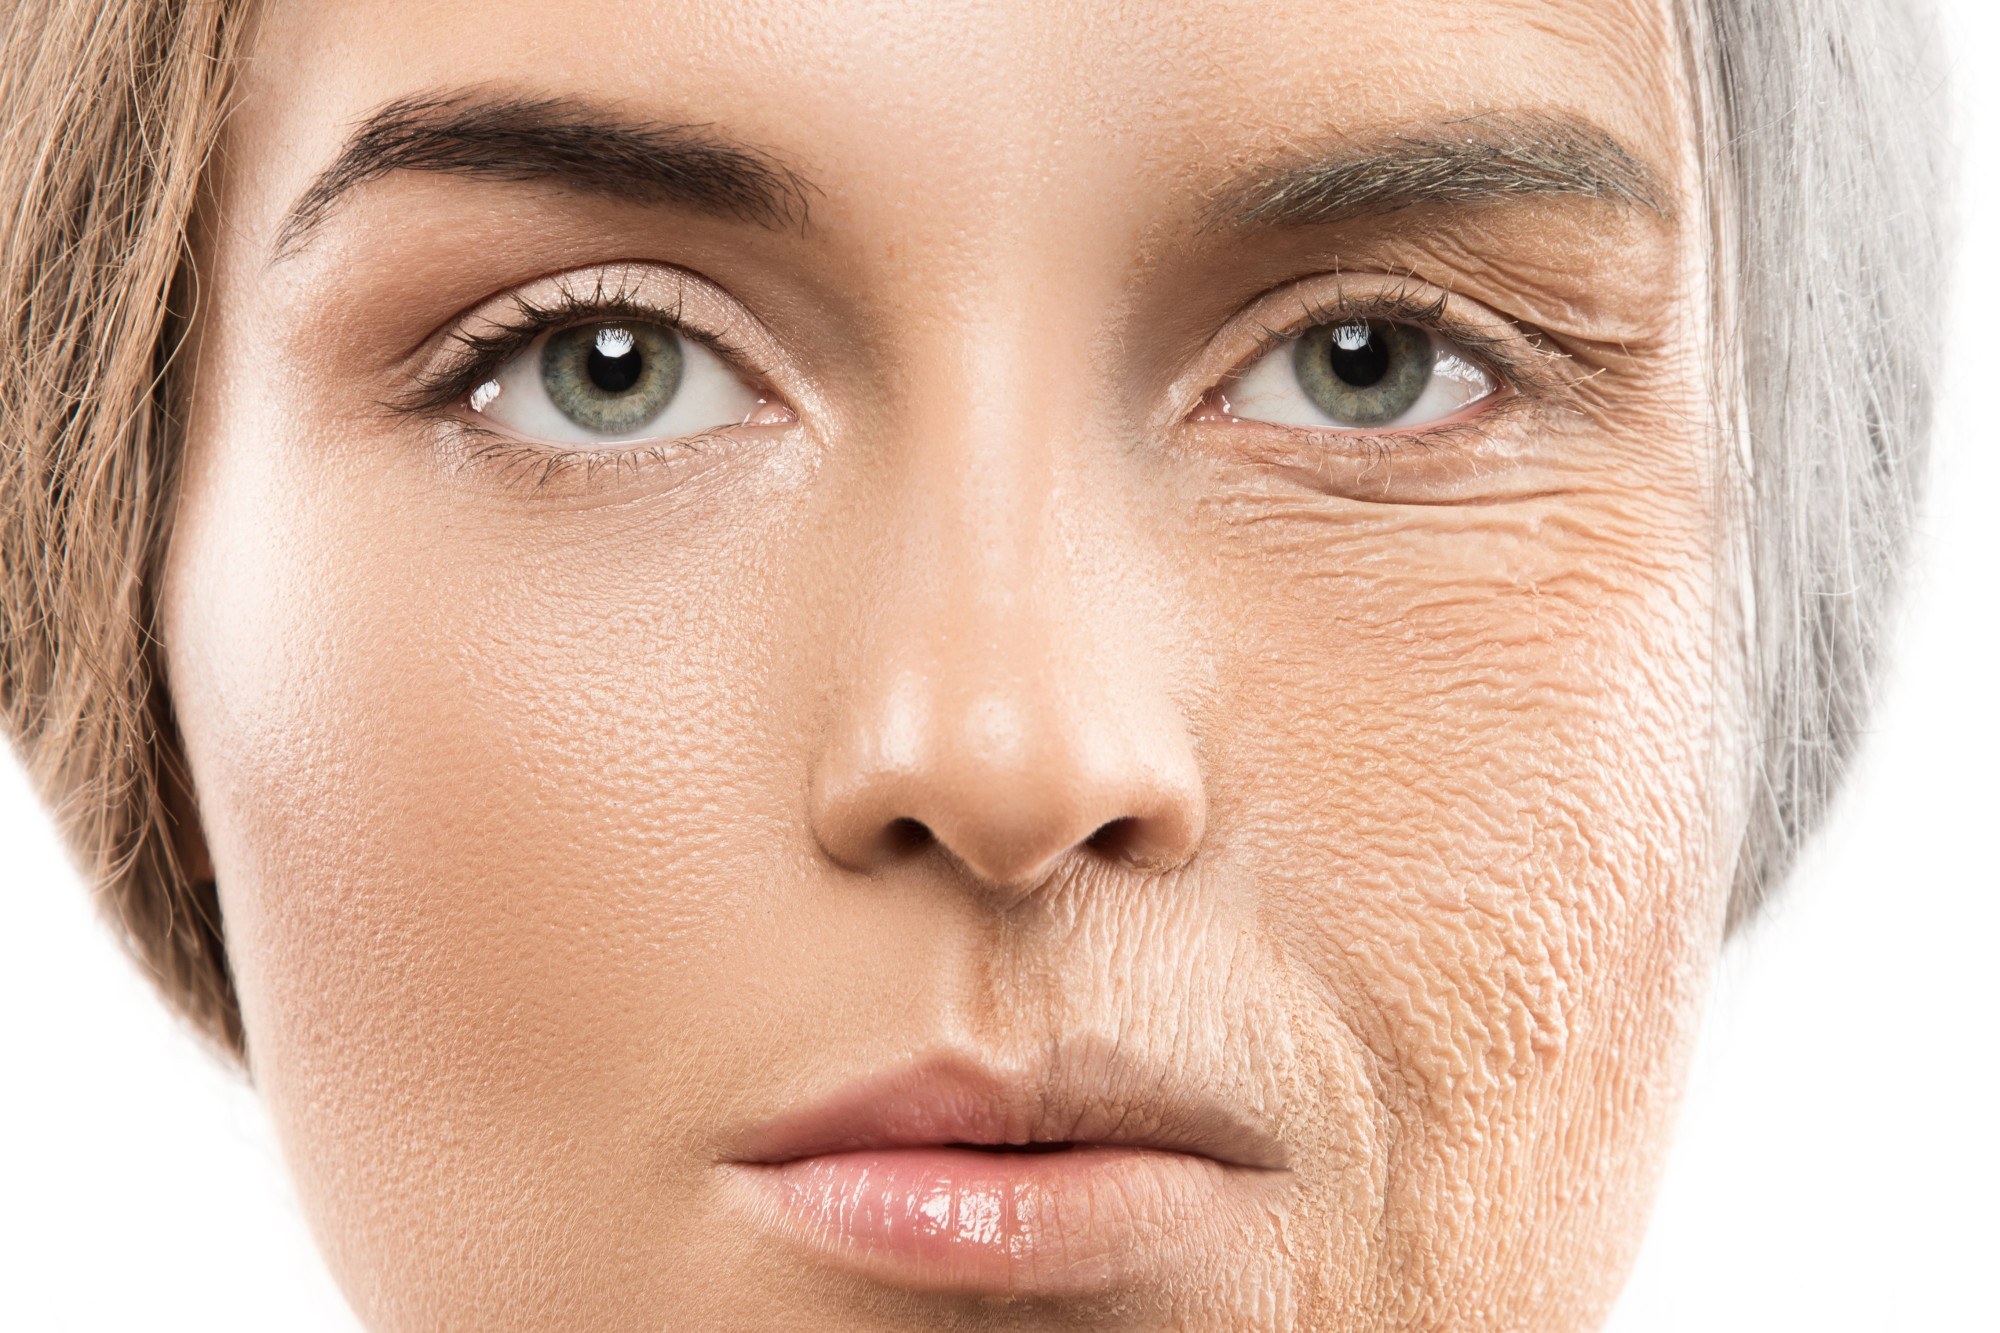 Reduce wrinkles and fine lines